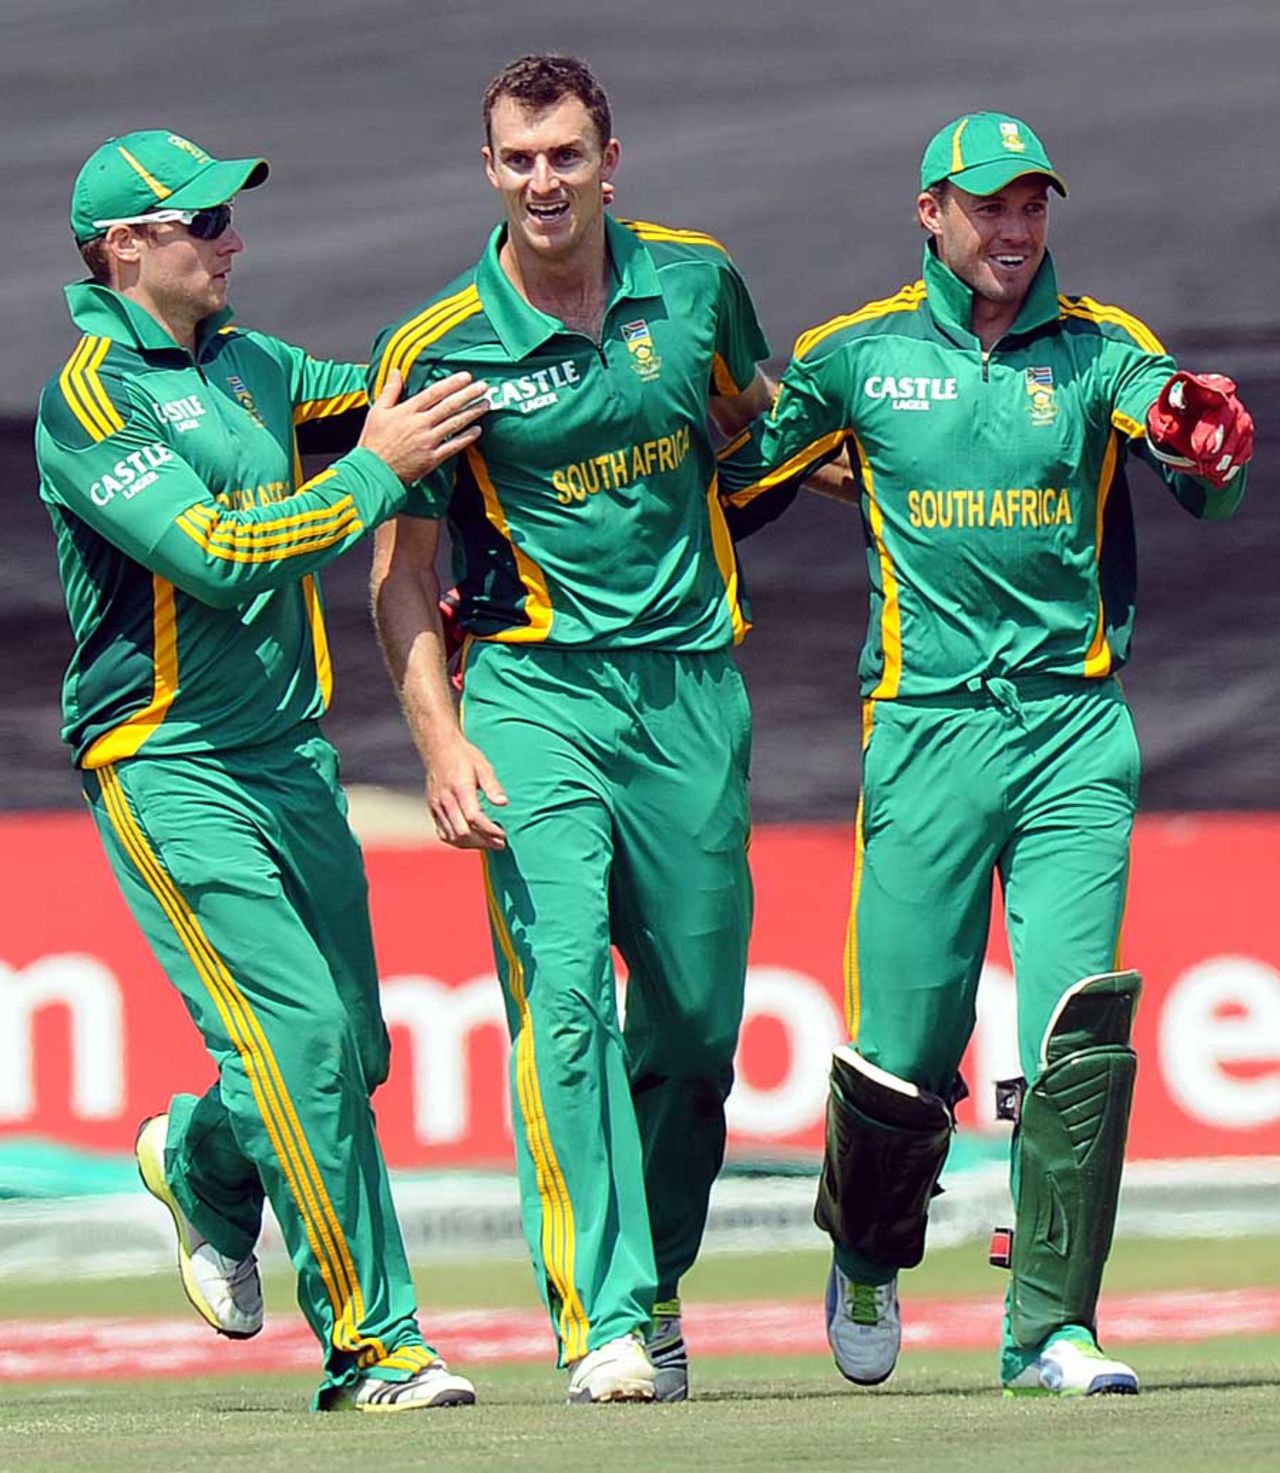 Ryan McLaren struck twice in the over before the batting Powerplay, South Africa v Pakistan, 5th ODI, Benoni, March 24, 2013